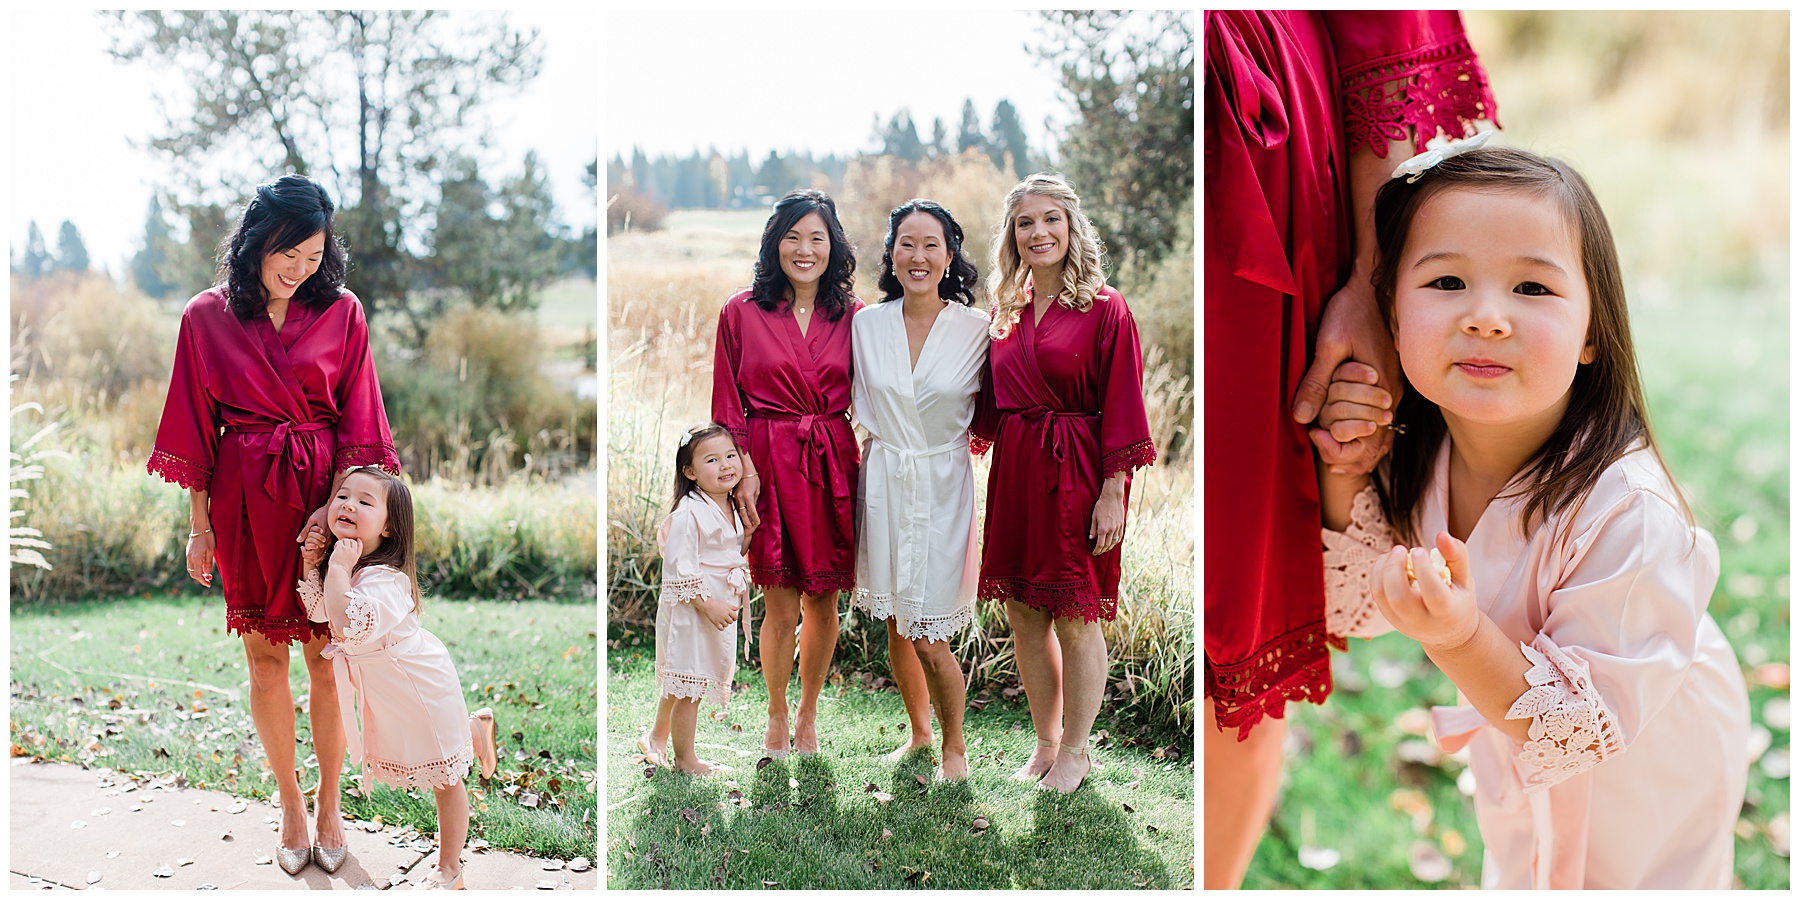 Portrait of the bridal party in robes for the Sunriver Resort Fall Riverfront Wedding